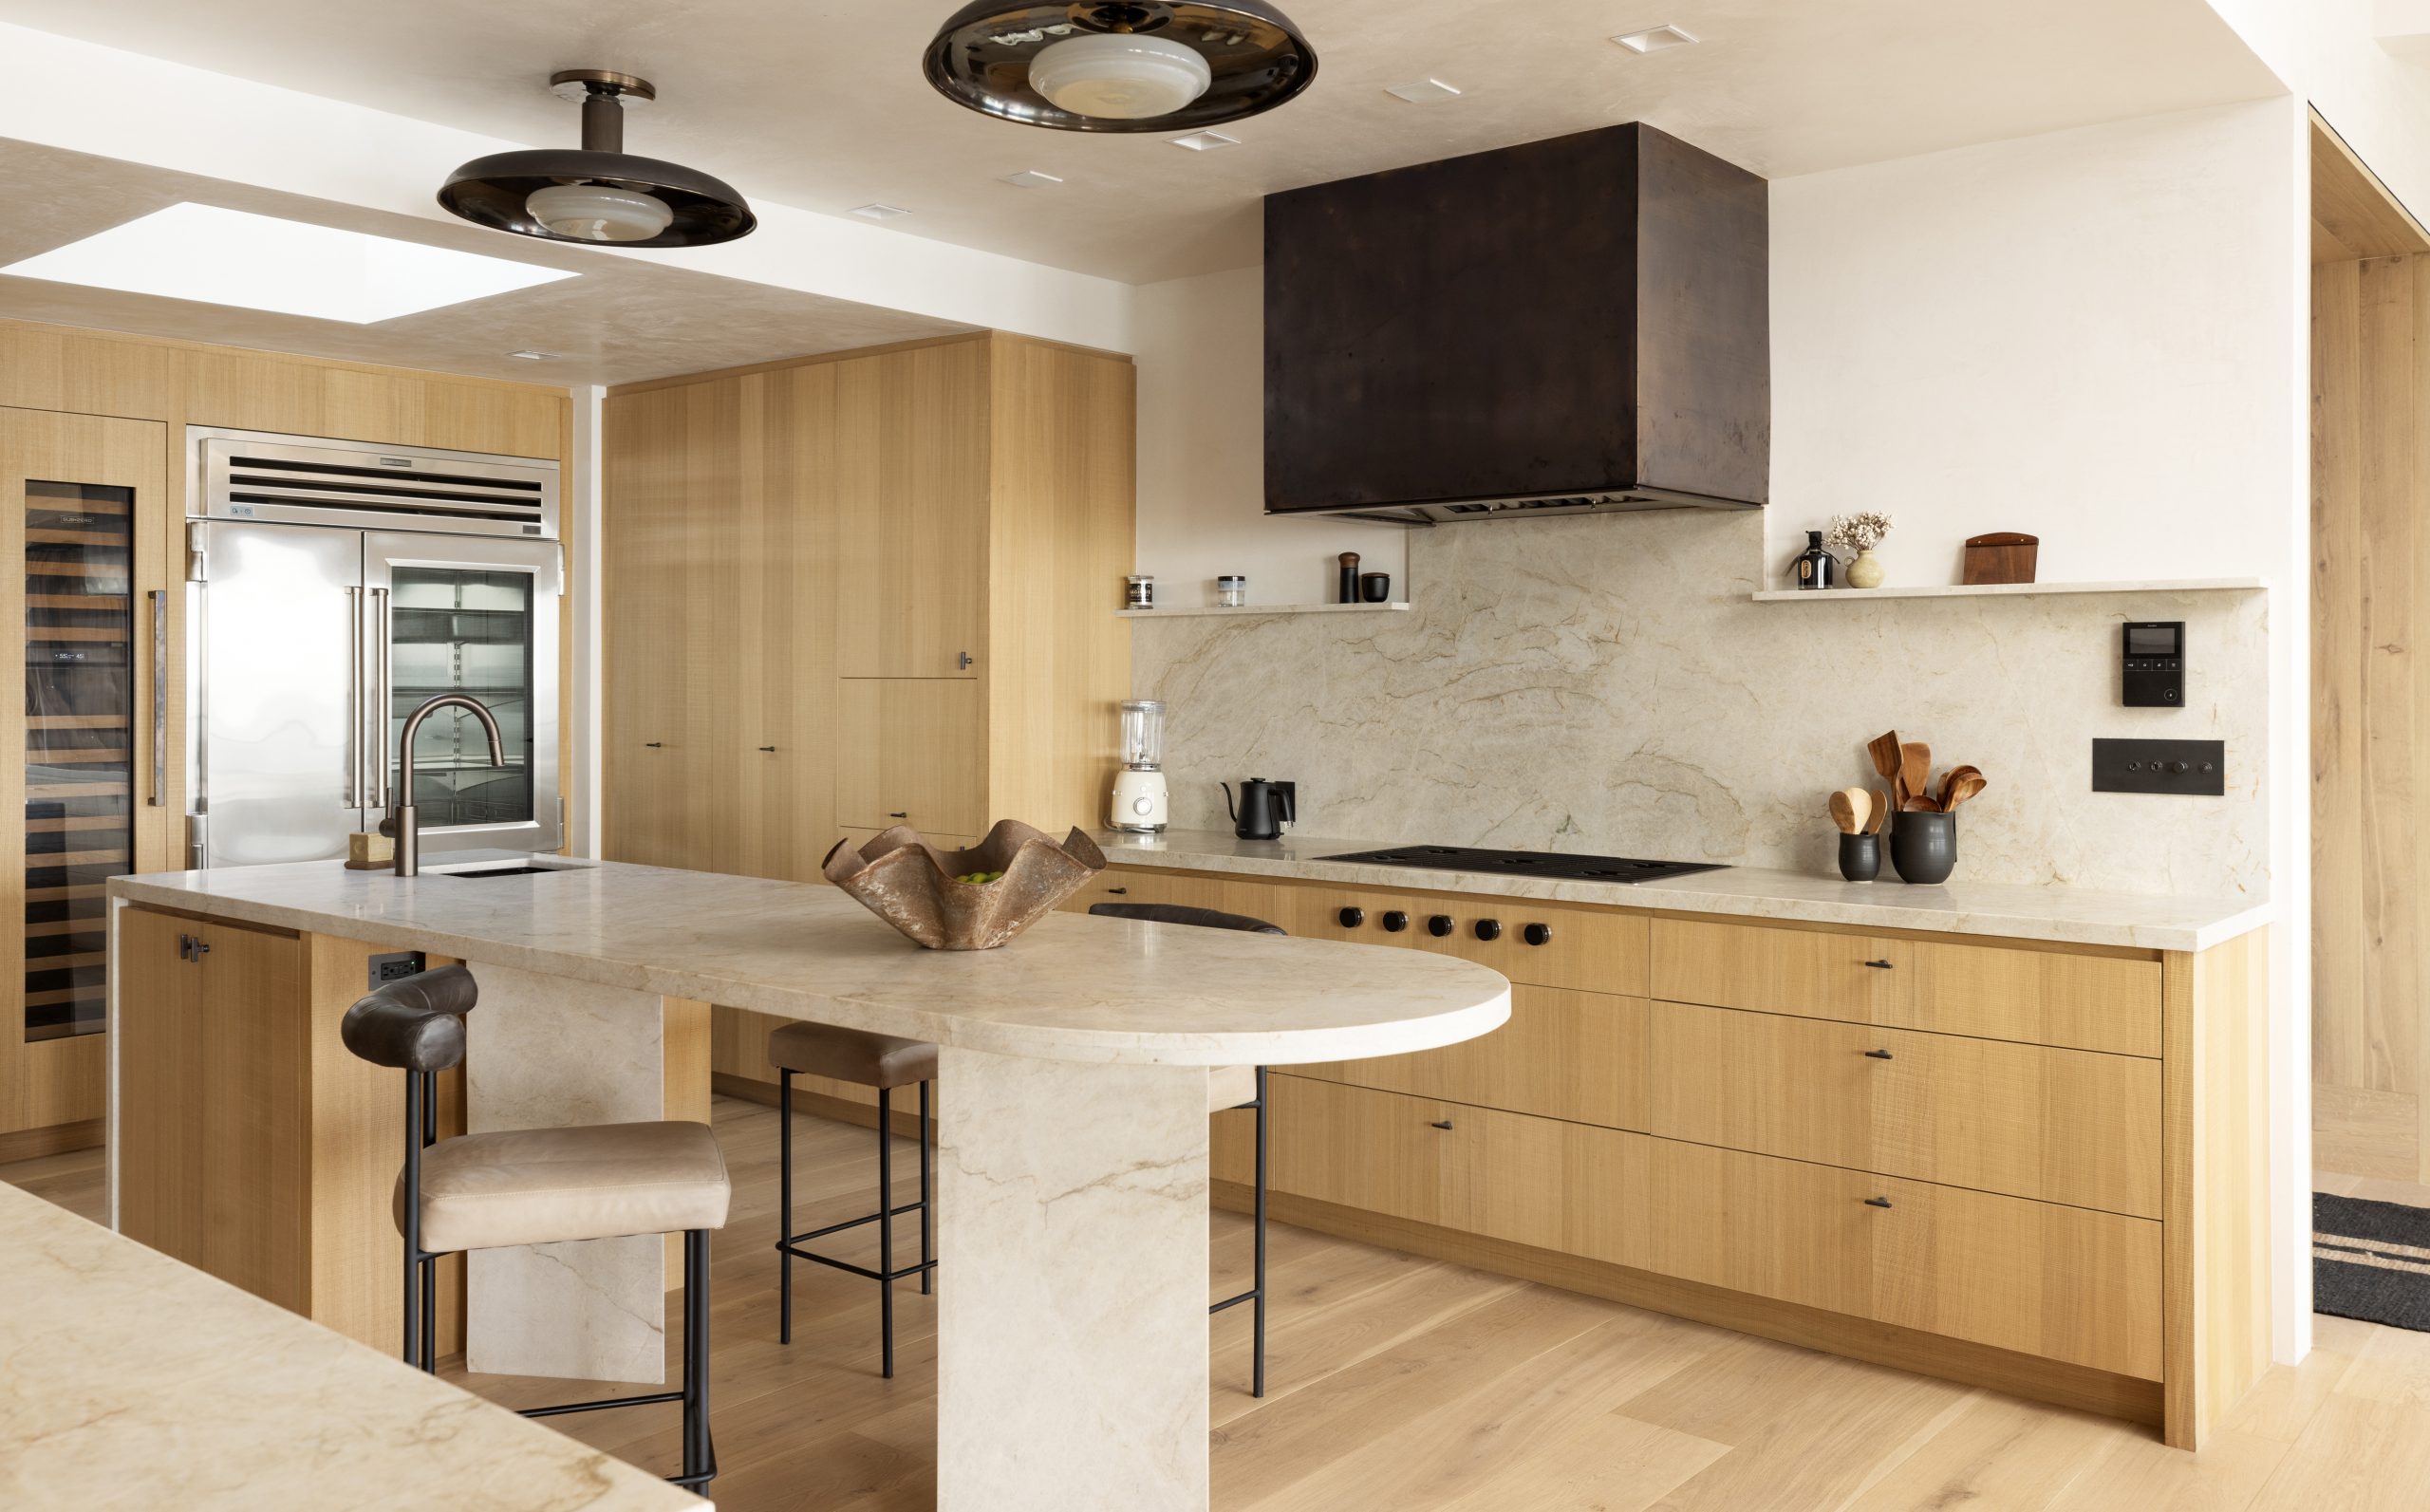 The contemporary kitchen features warm wood and an island with bar seating.